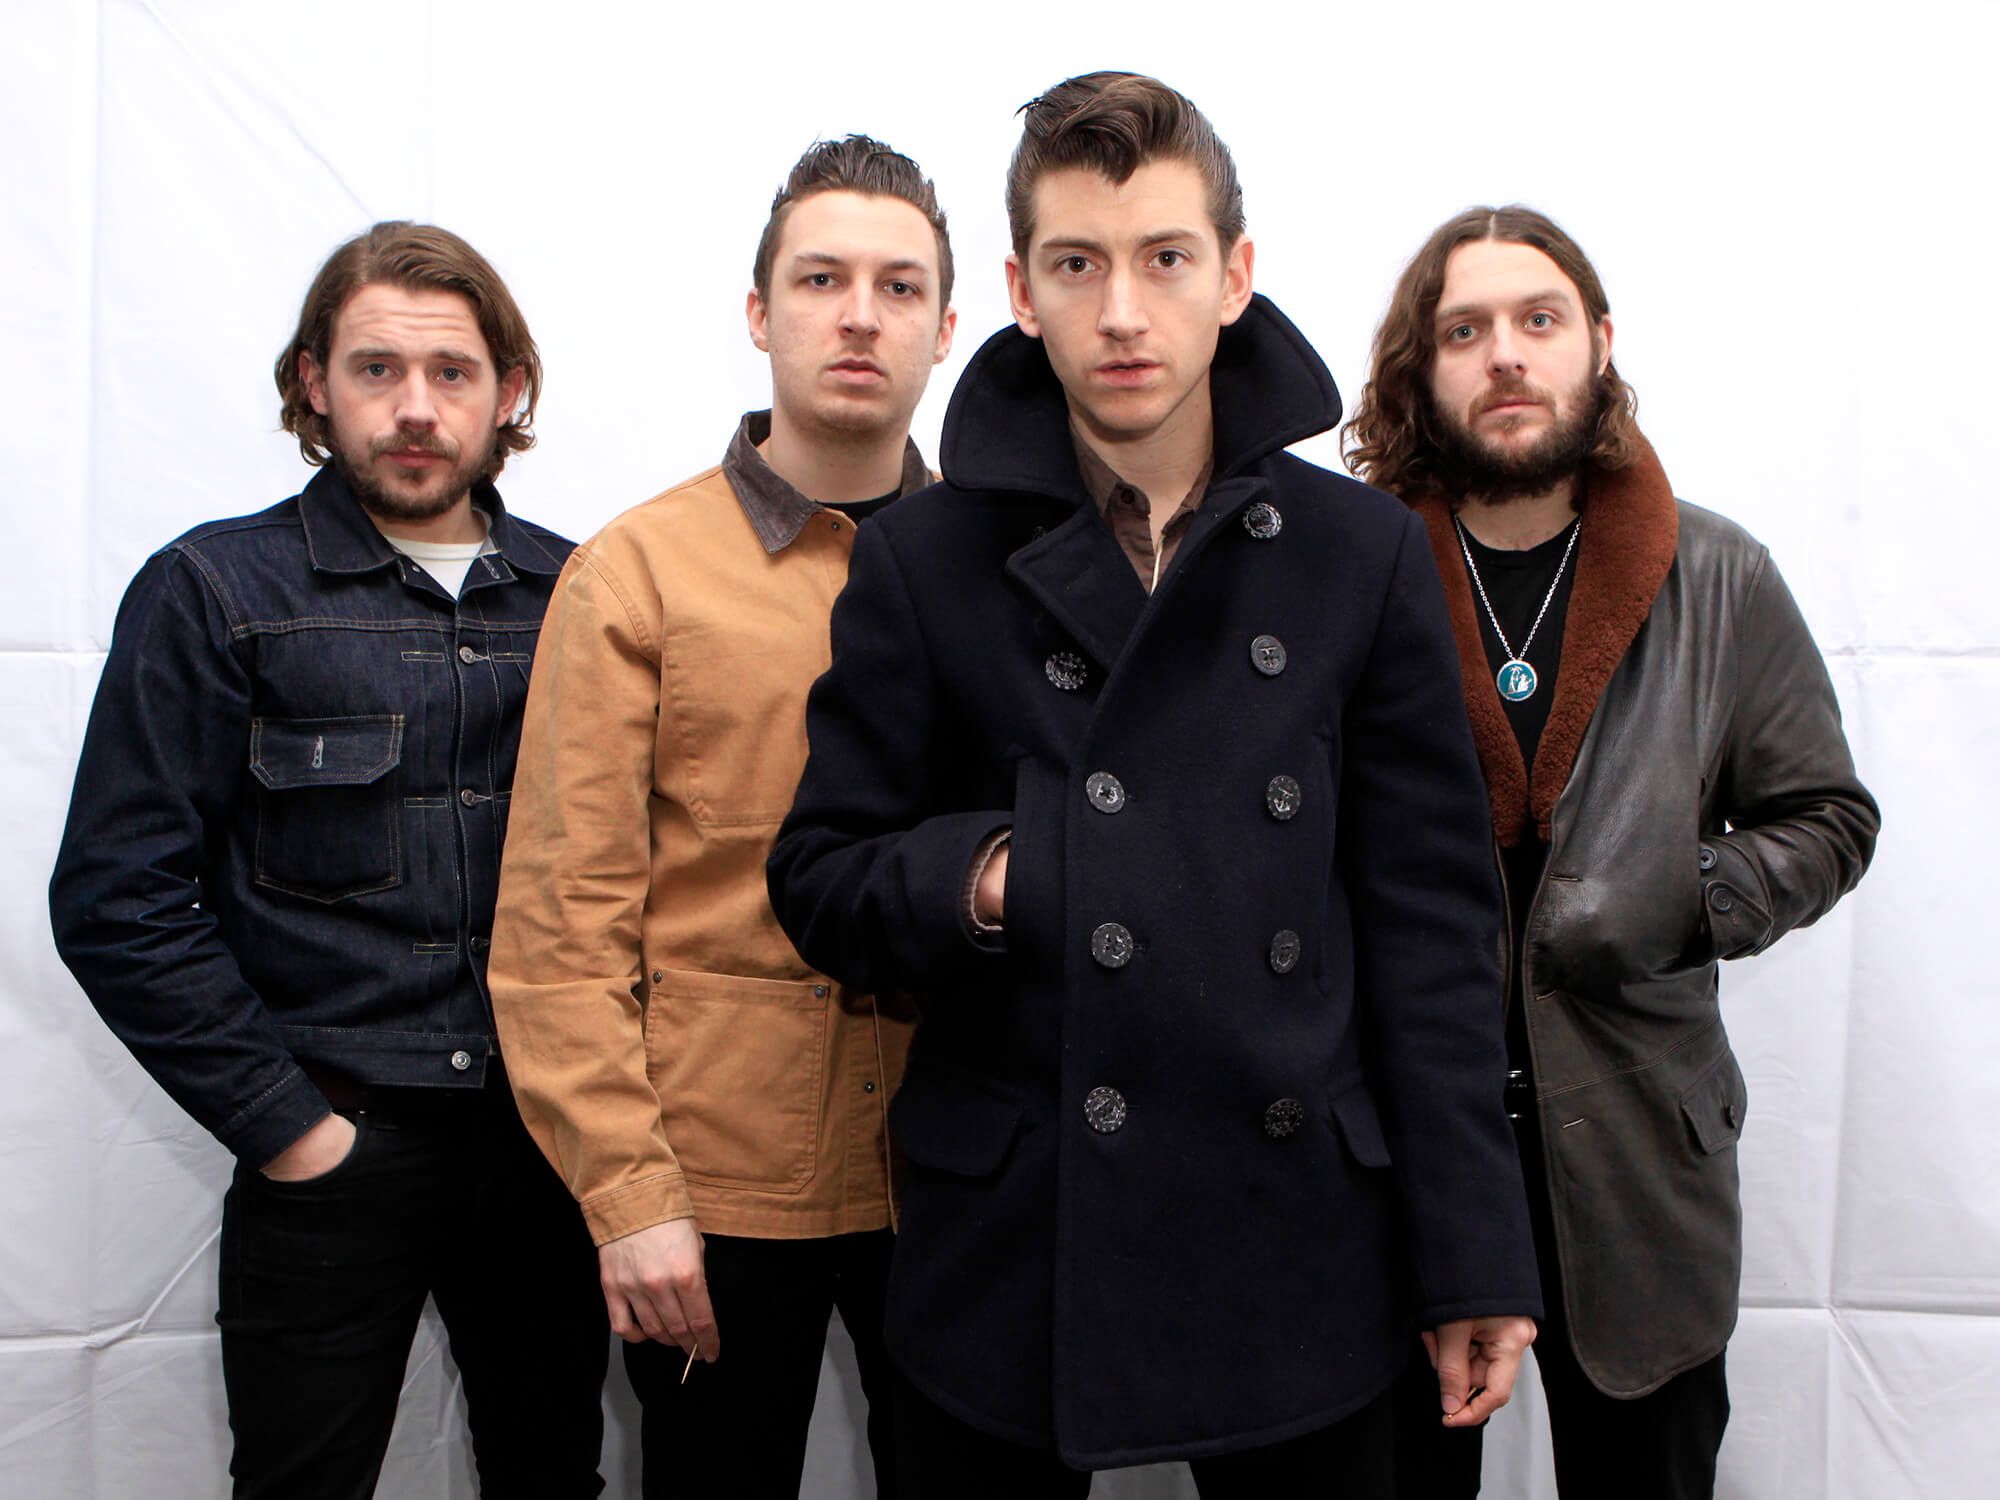 The four members of the band Arctic Monkeys.